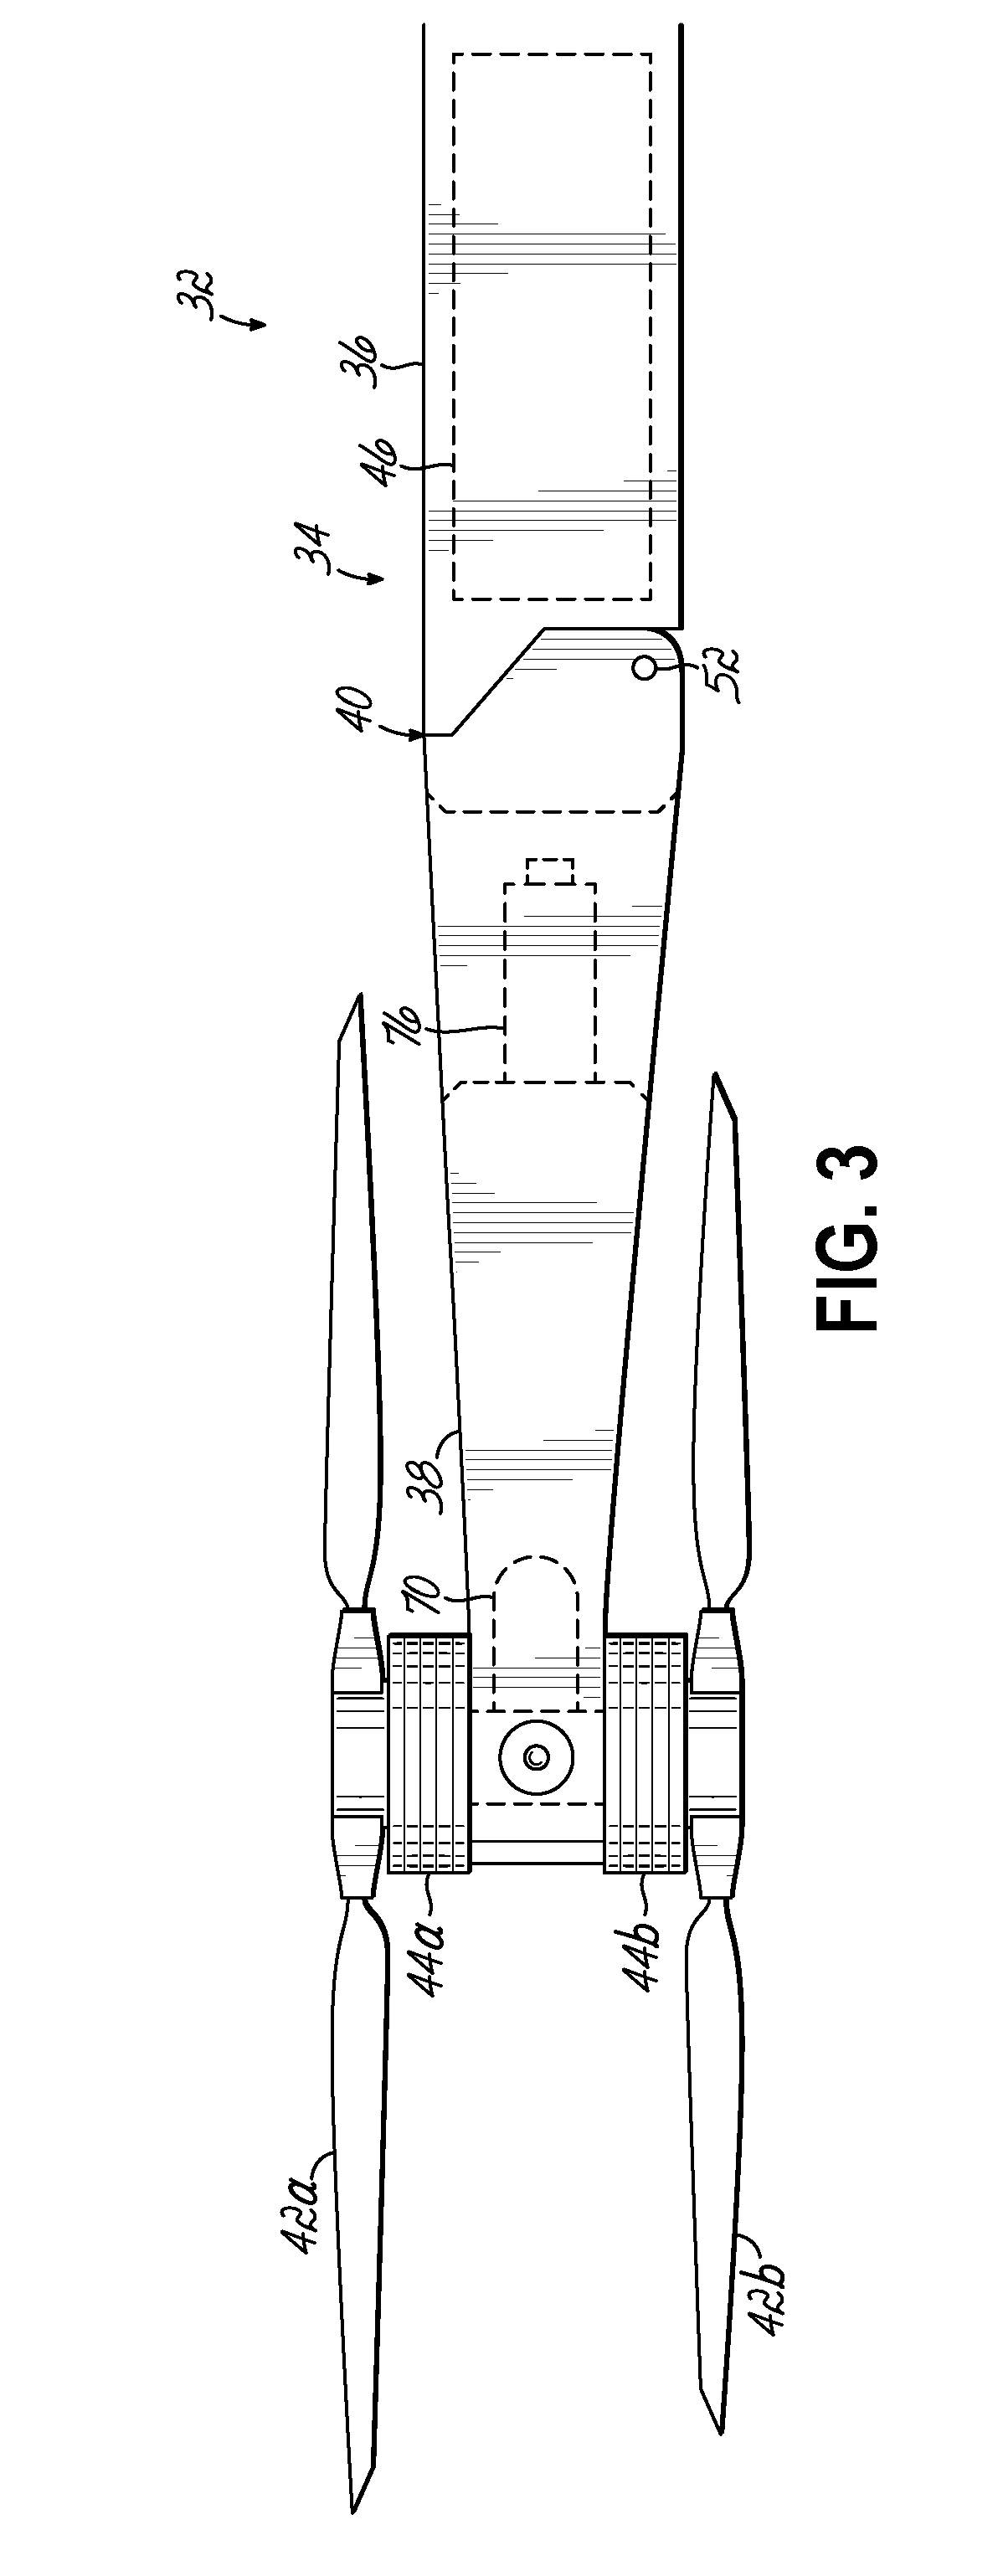 Auxiliary power system for rotorcraft with folding propeller arms and crumple zone loading gear